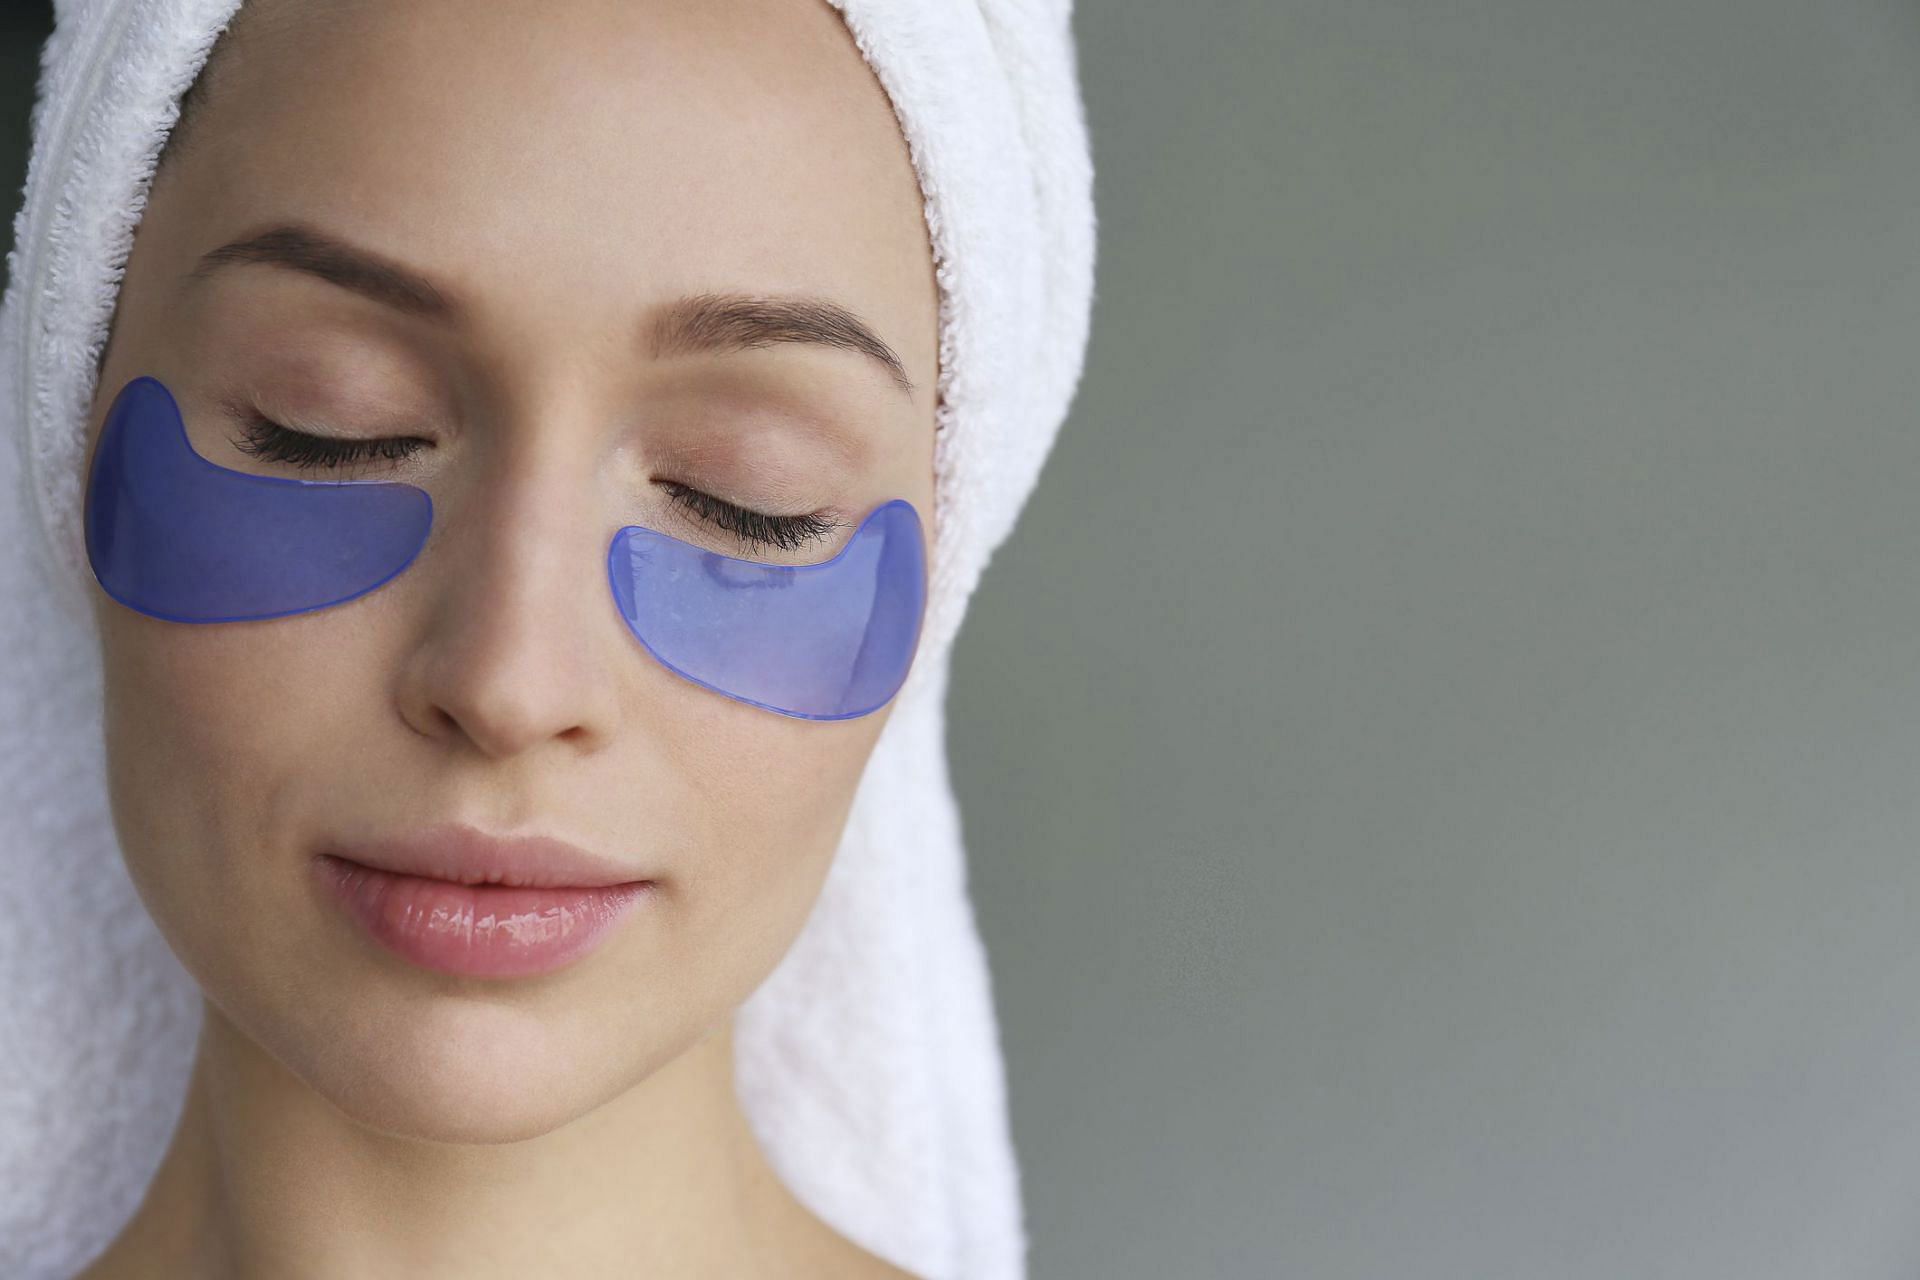 The most effective ways to treat sunken eyes at home